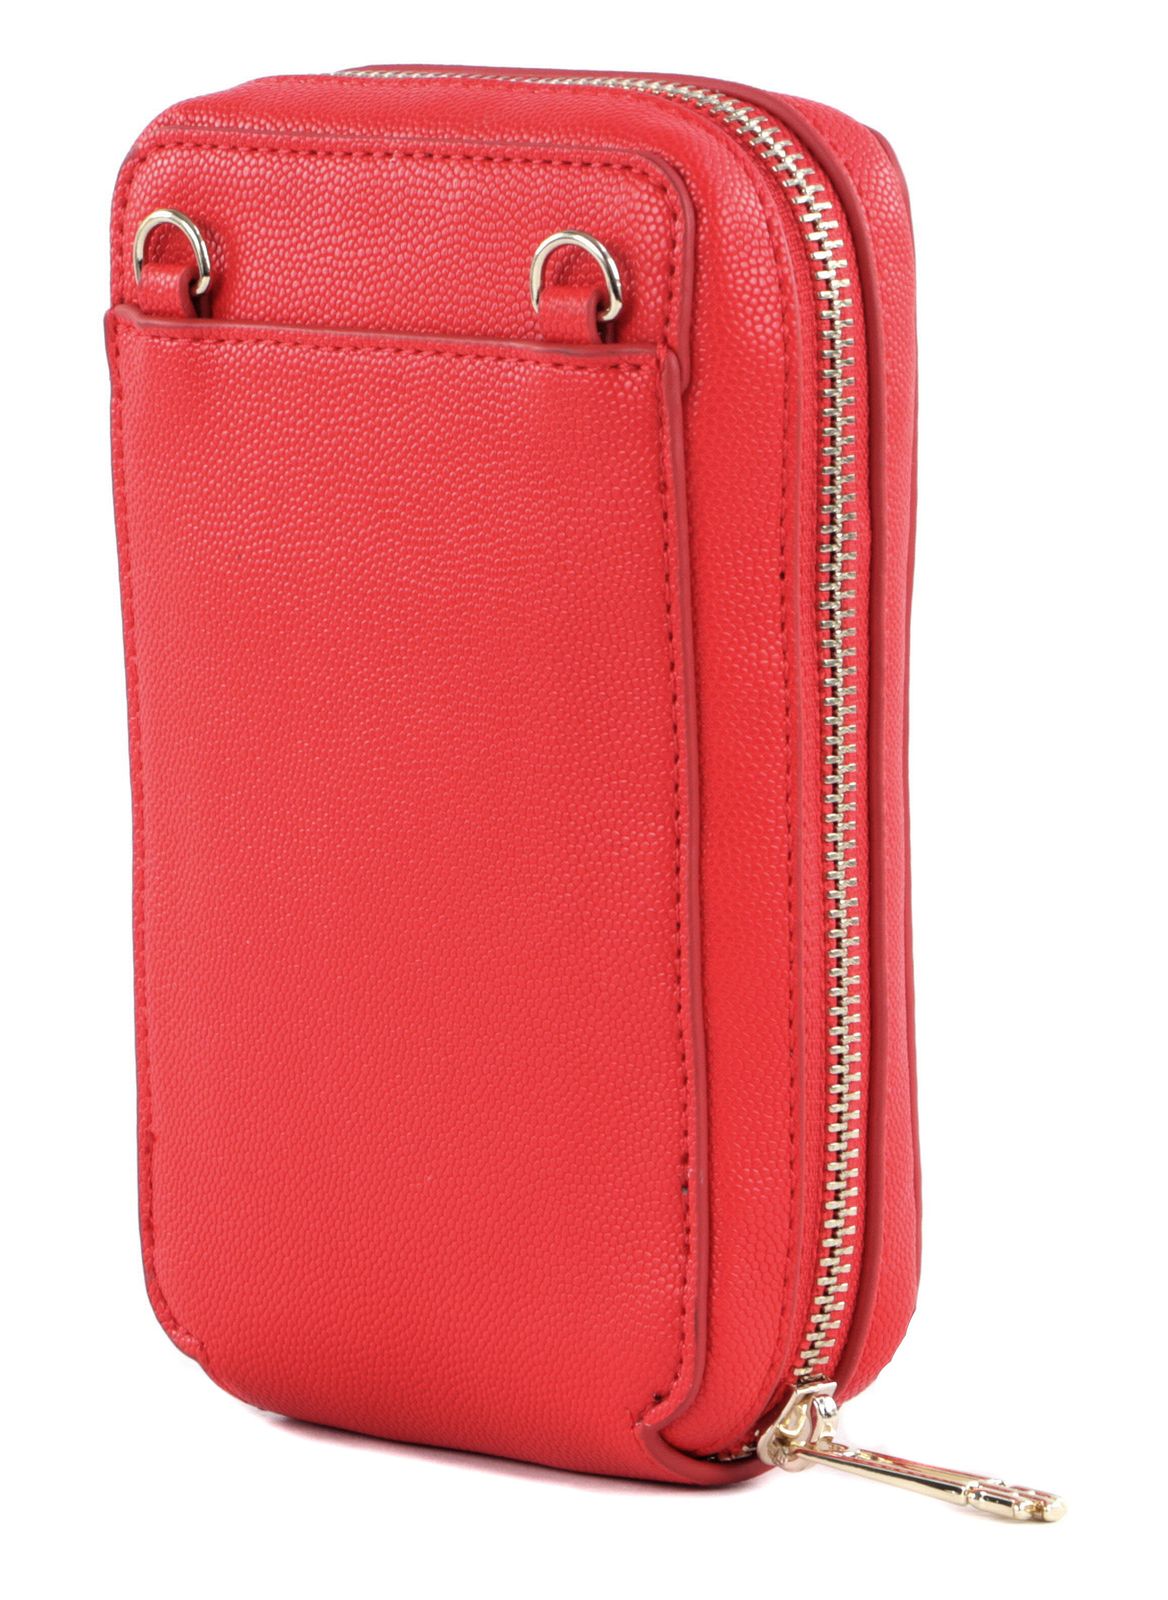 TOMMY HILFIGER TH Timeless Phone Wallet | Buy bags, purses